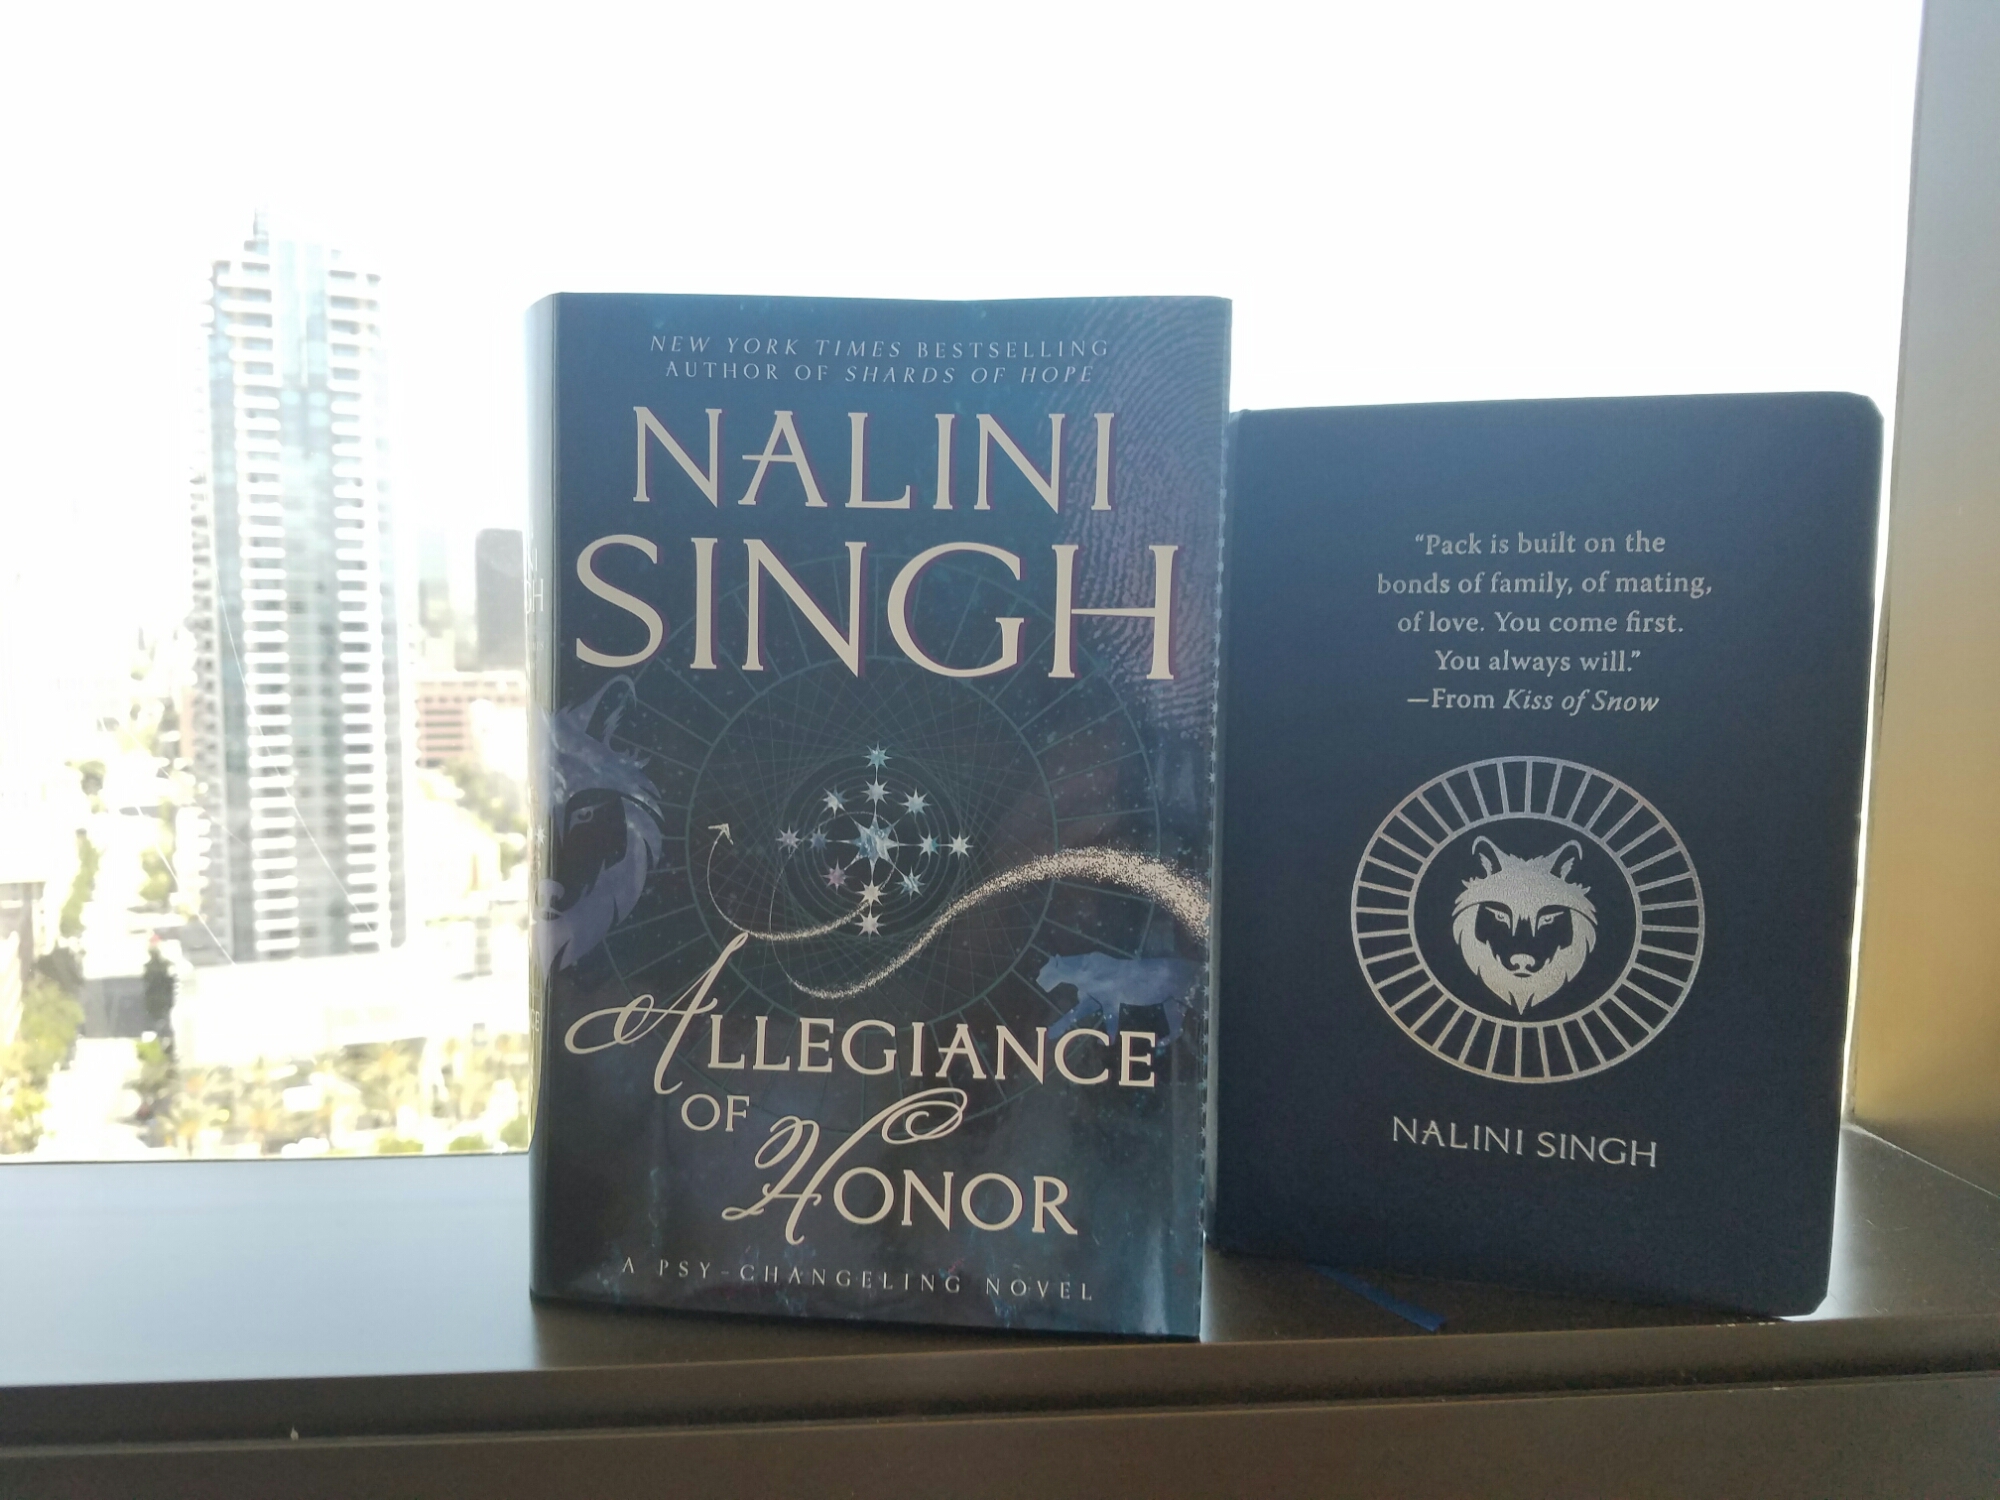 Giveaway: Allegiance of Honor by Nalini Singh (signed!) and a keepsake journal!